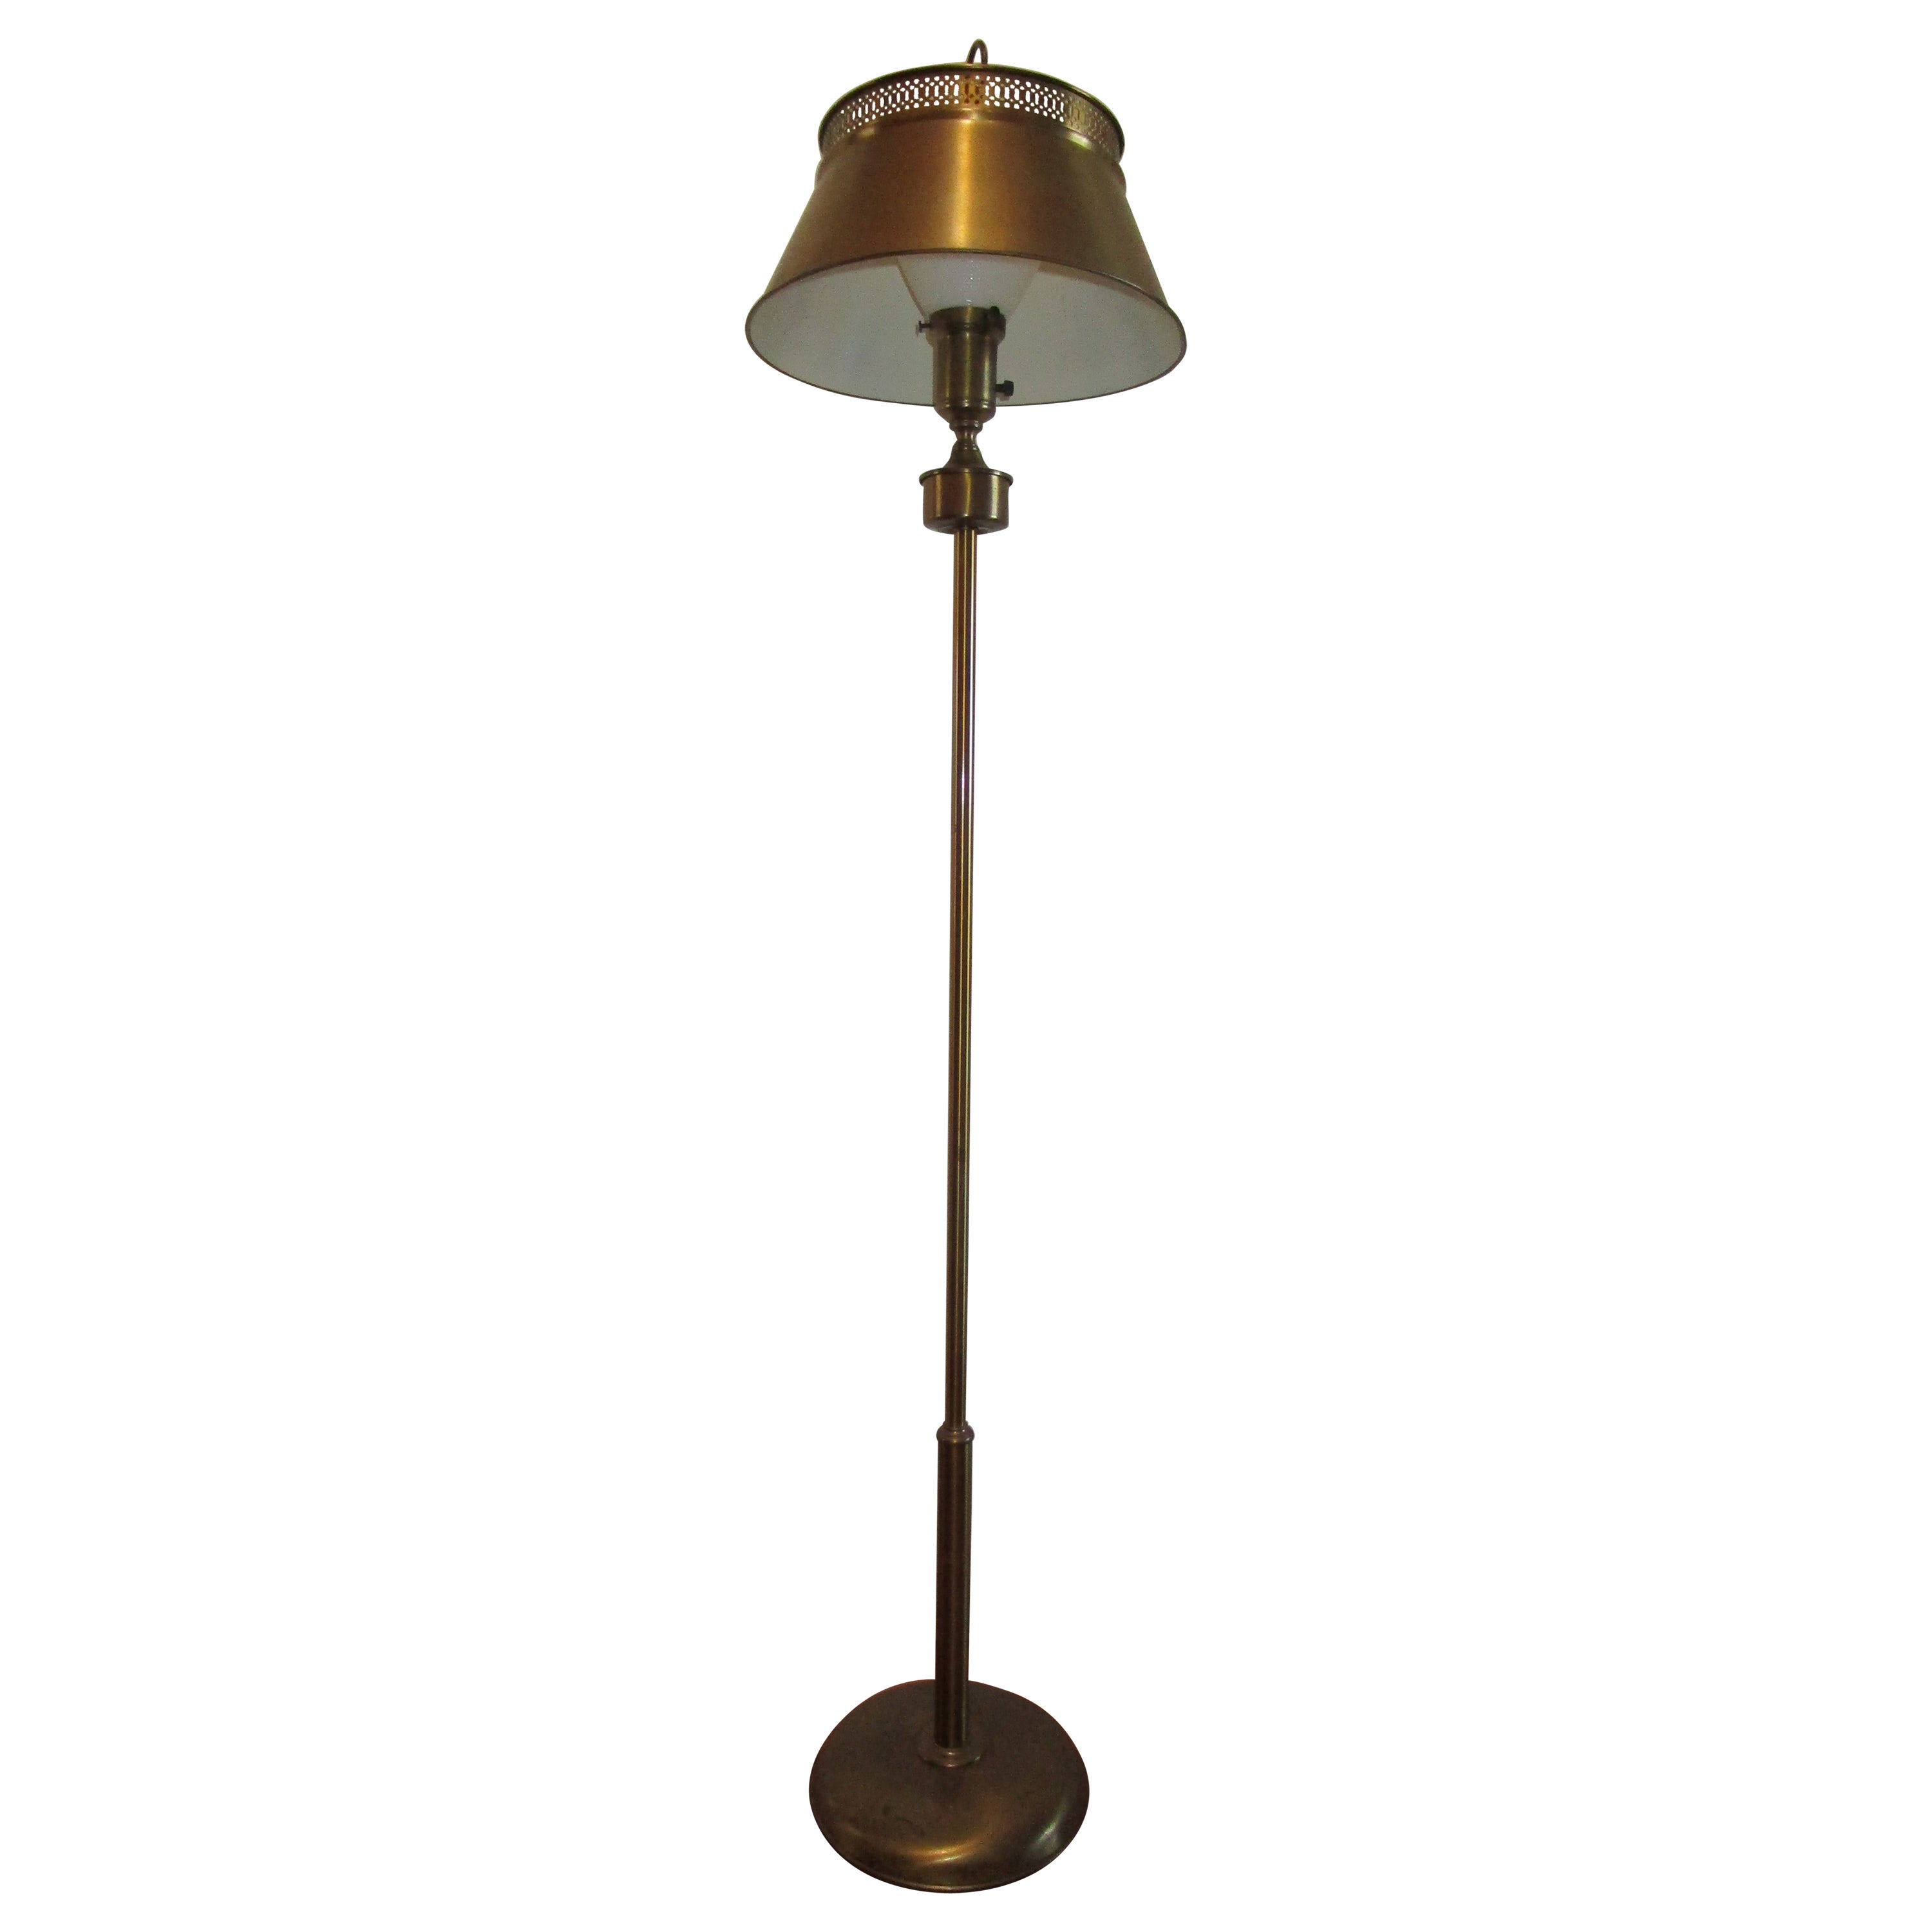 Tole Brass Gold Tone Mid Century Floor Lamp with two Shades